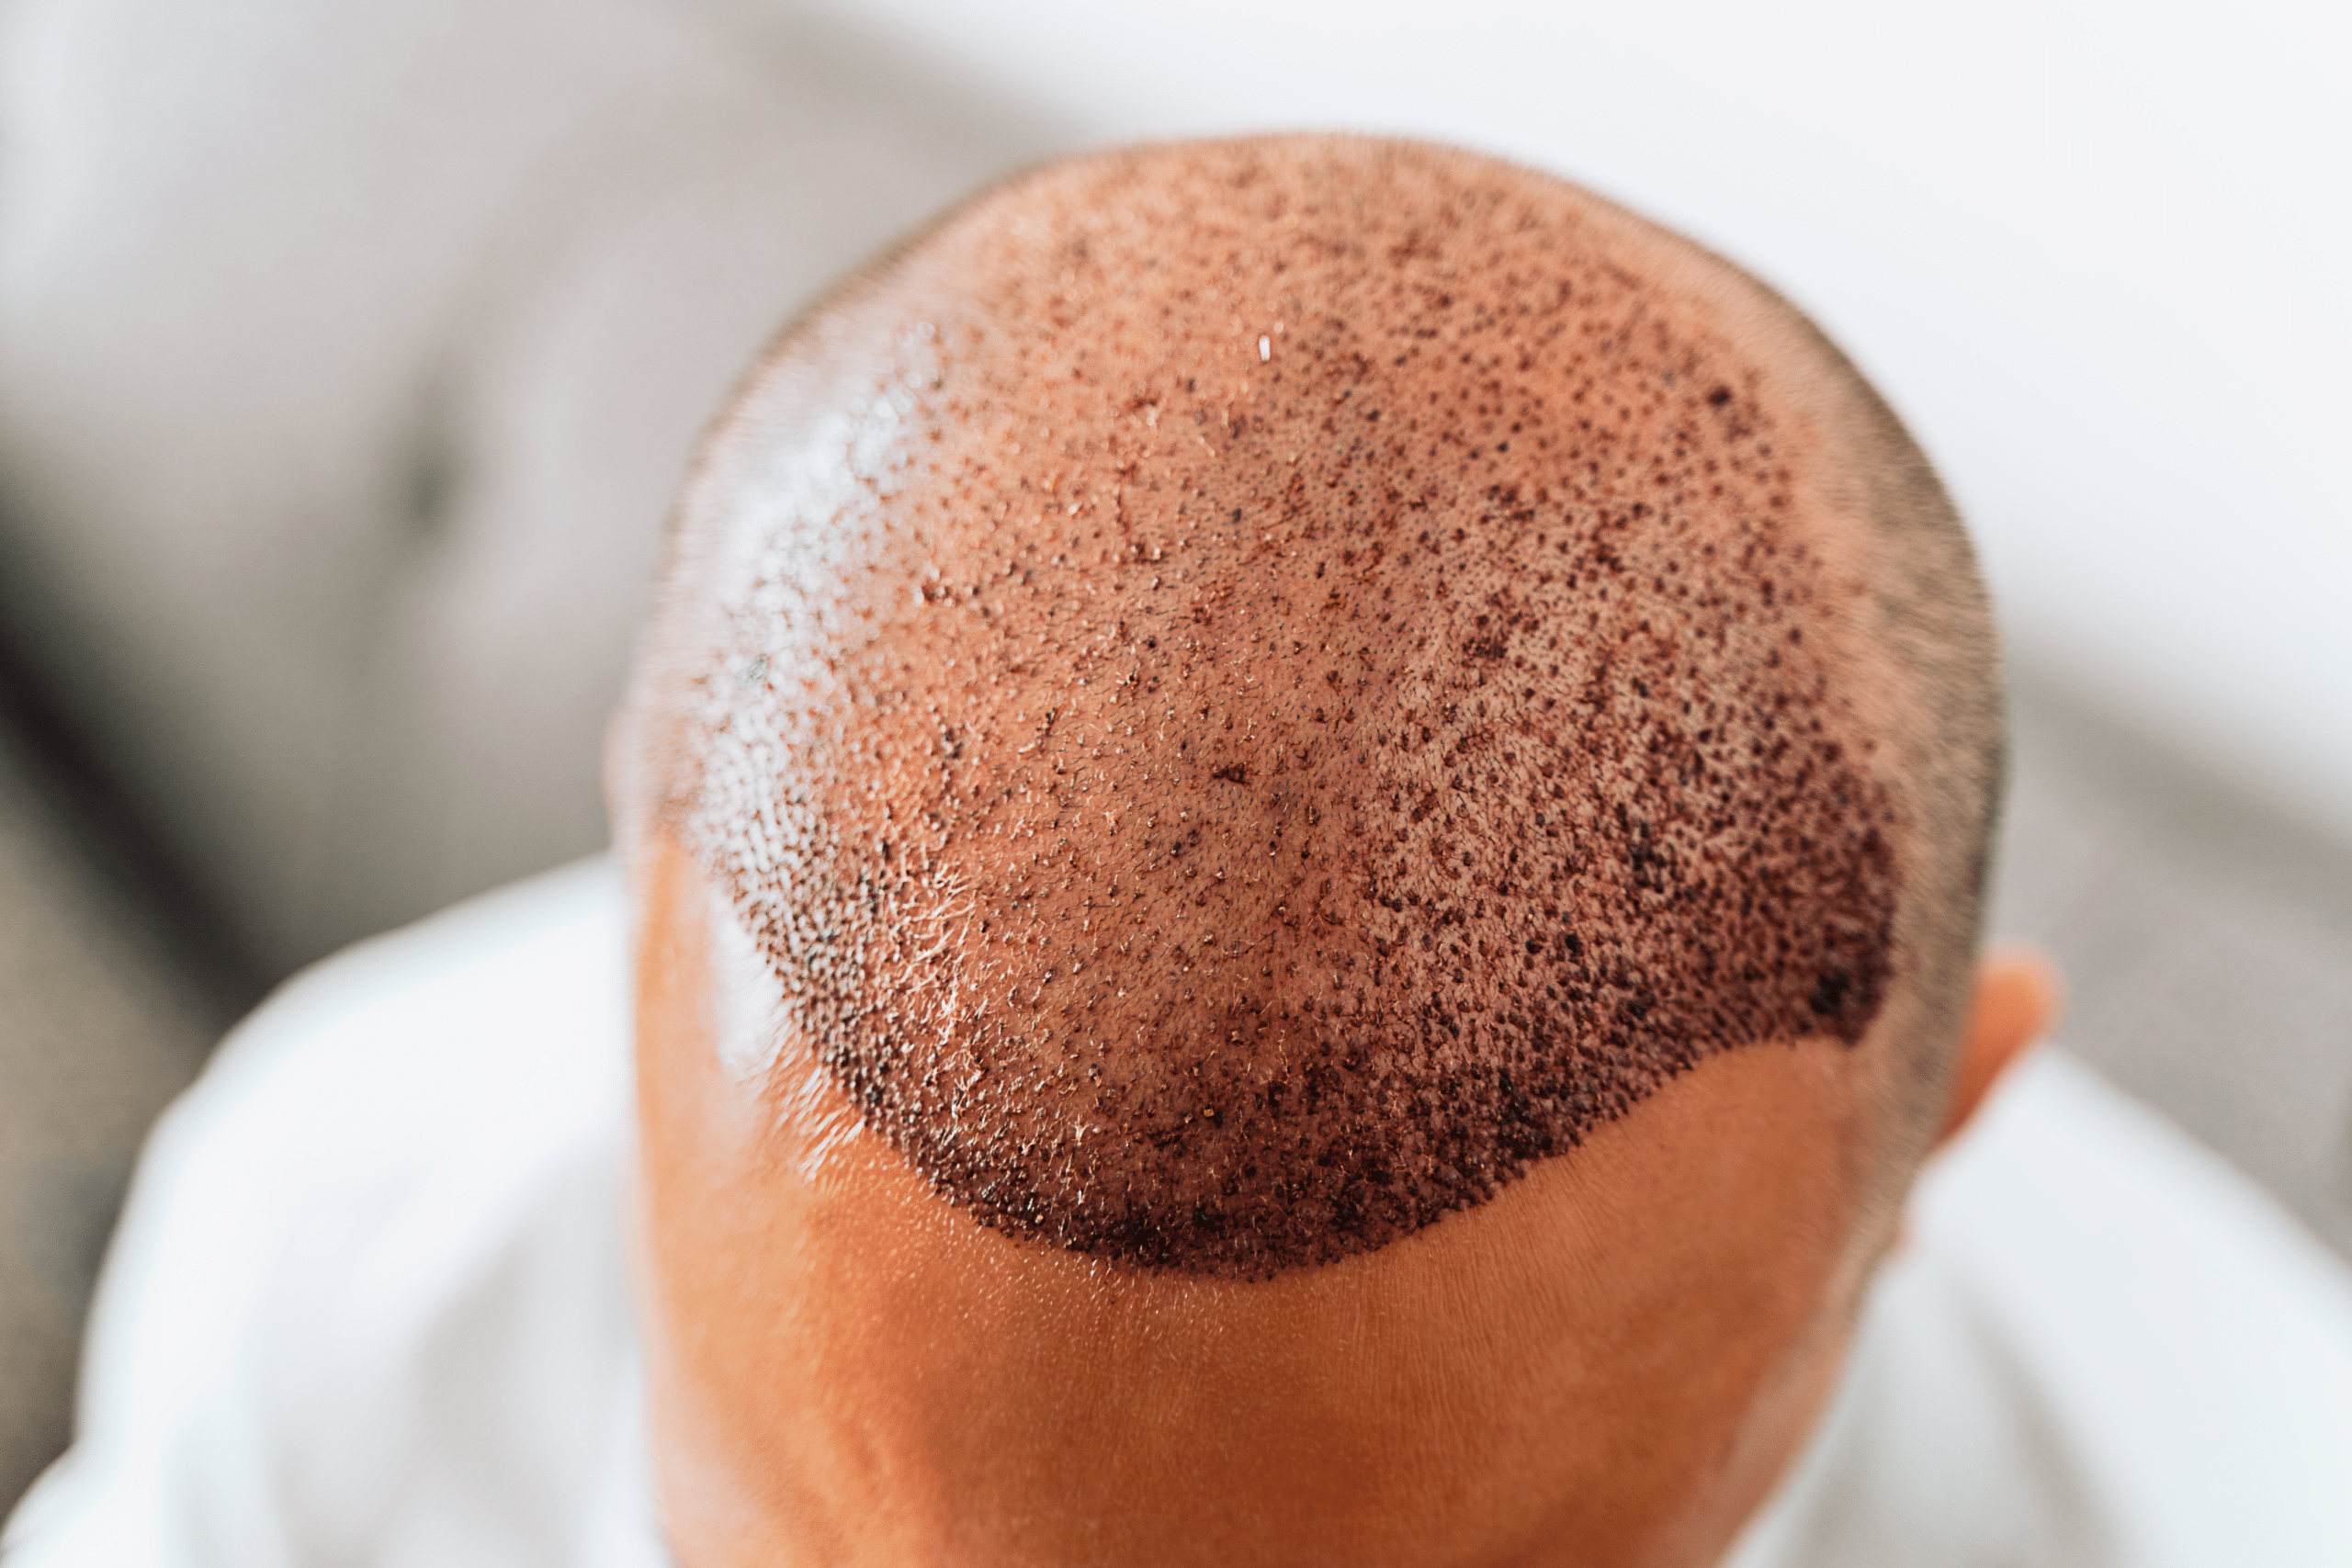 A man with a bald spot on his head.